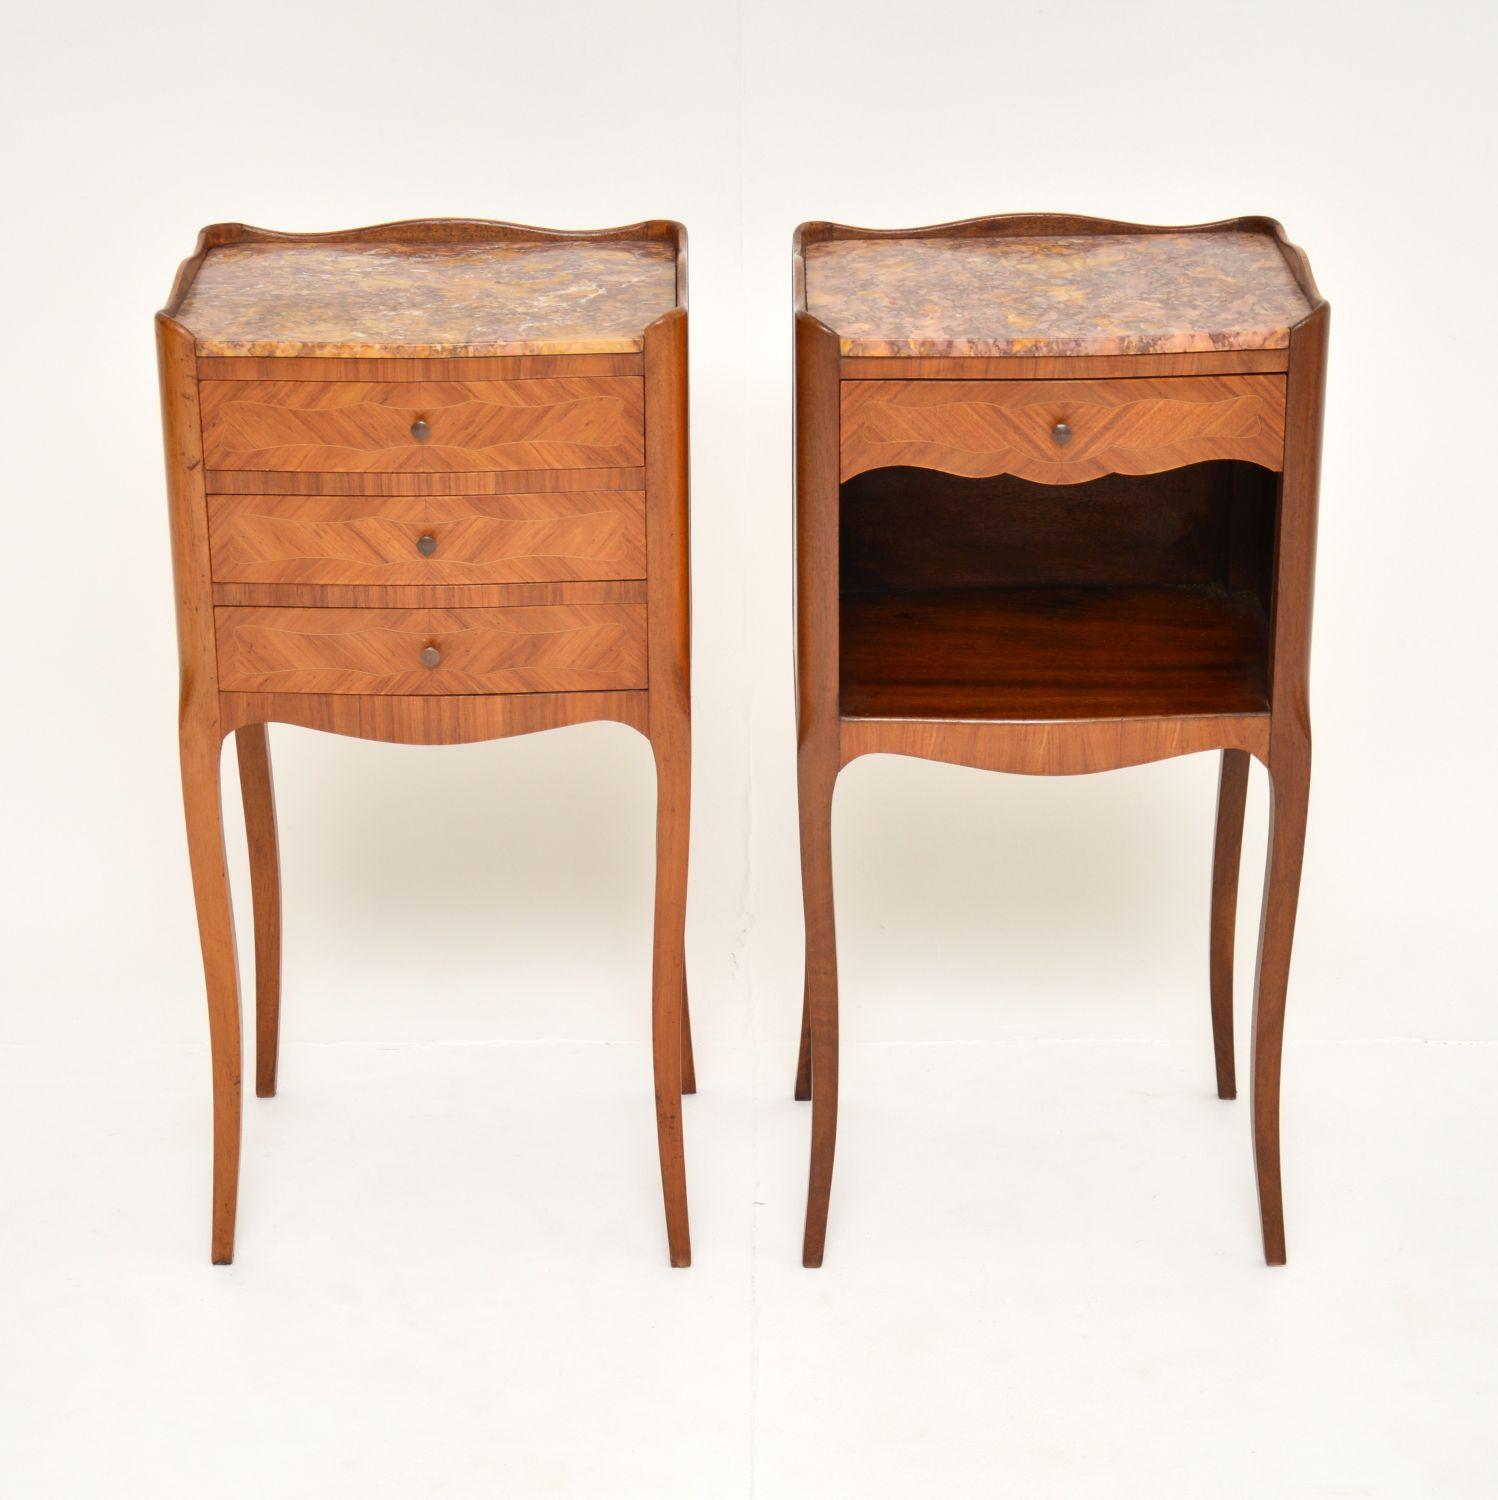 A stunning matched pair of antique French bedside cabinets / side tables, dating from around the 1890-1900 period.
They have gorgeous fixed marble tops and are beautifully made from inlaid king wood. One has three drawers, the other has one drawer